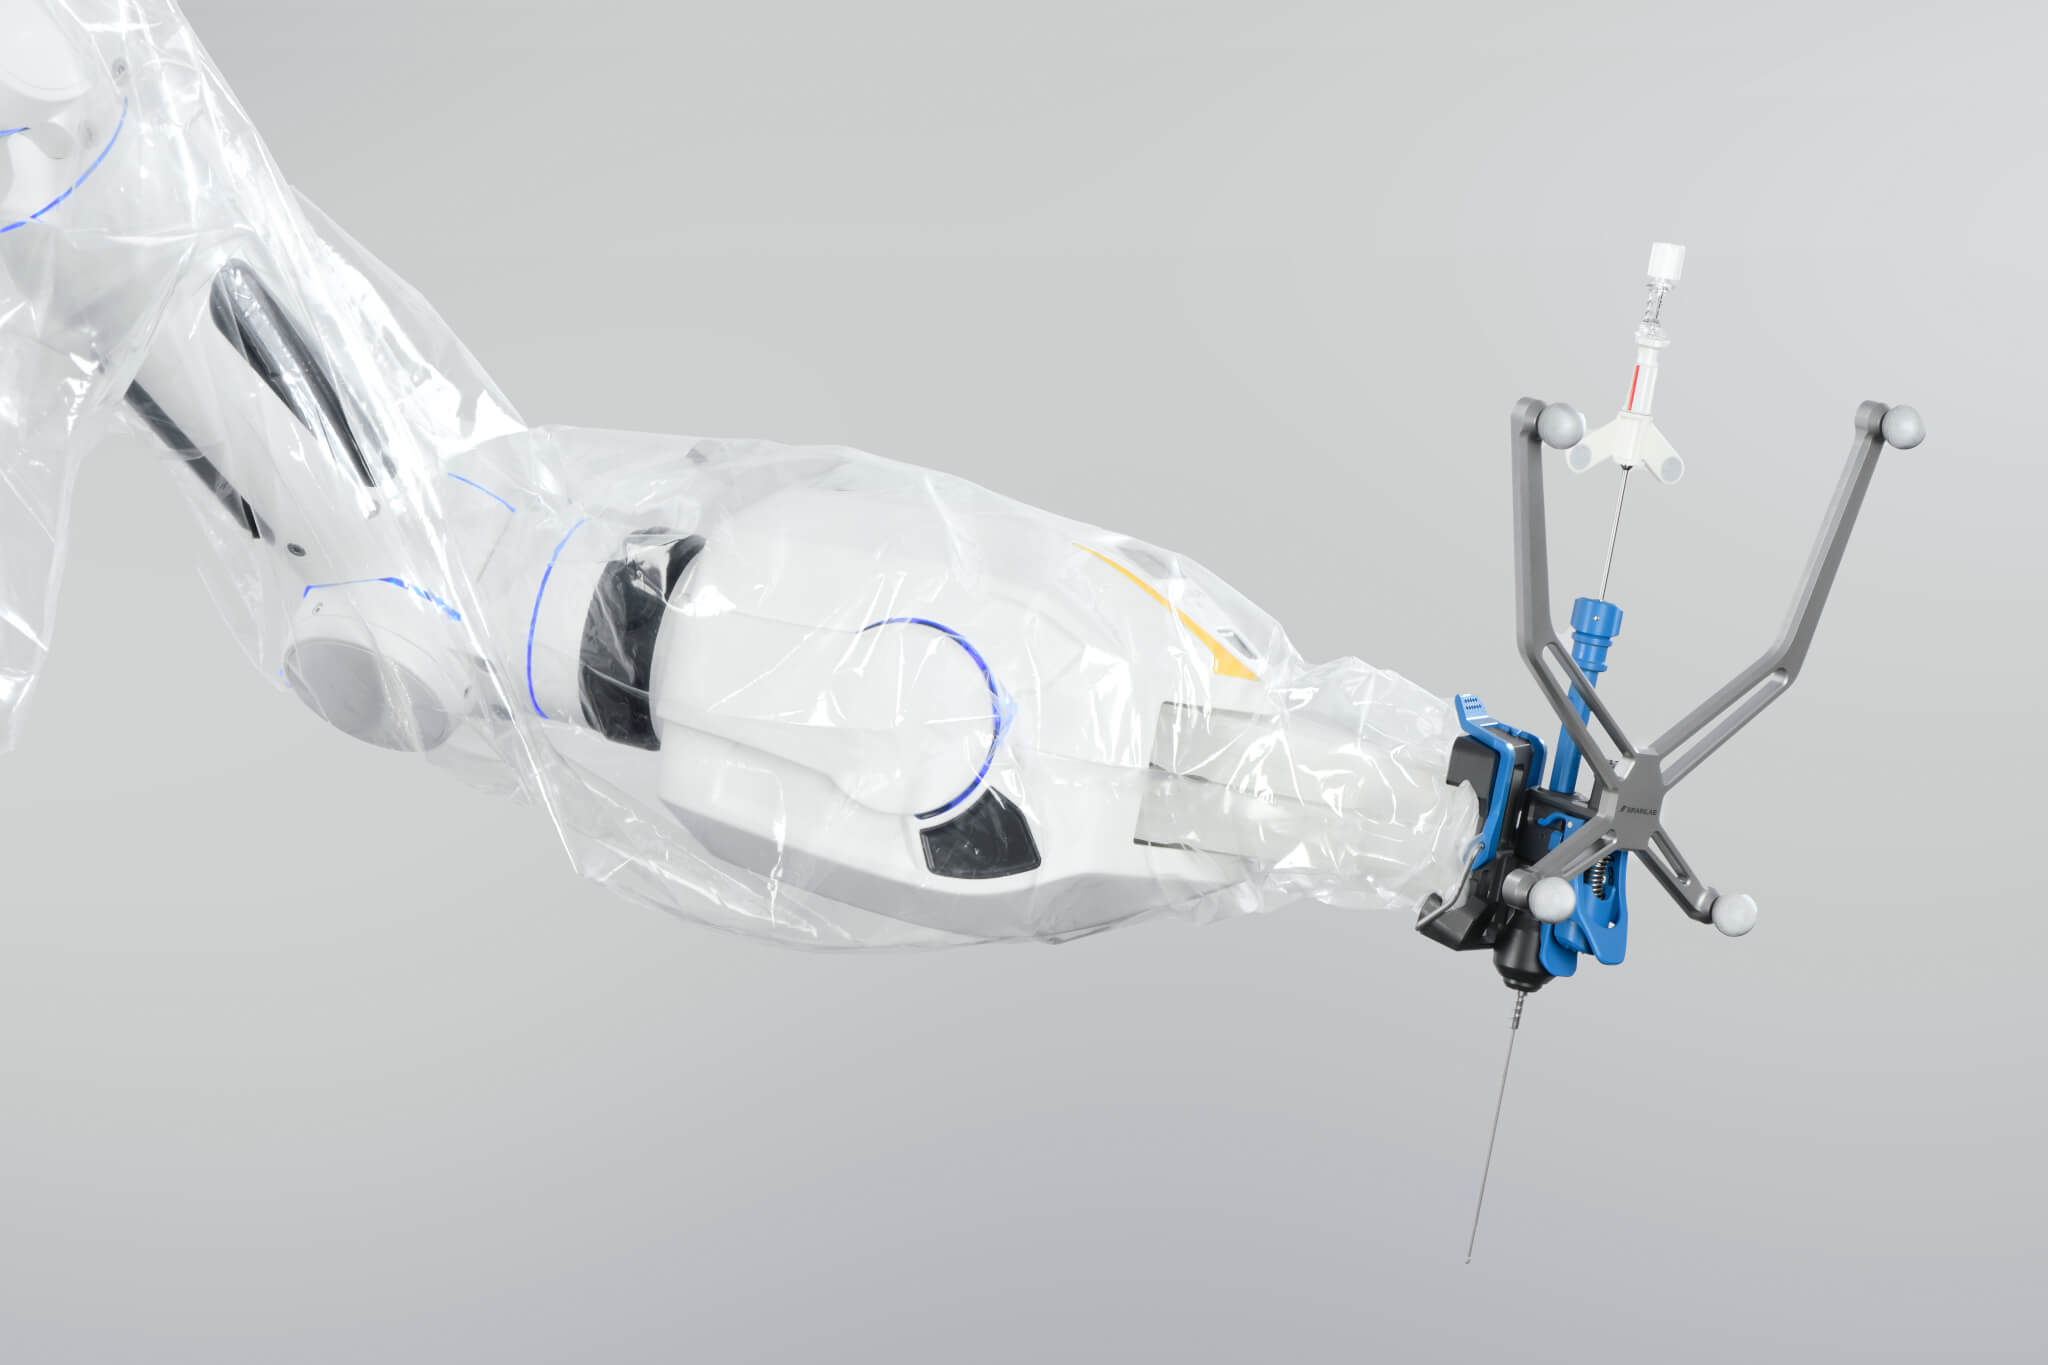 A draped Cirq robotic surgical arm system holds a cranial surgery module with biopsy needle inserted into it in front of a gray background